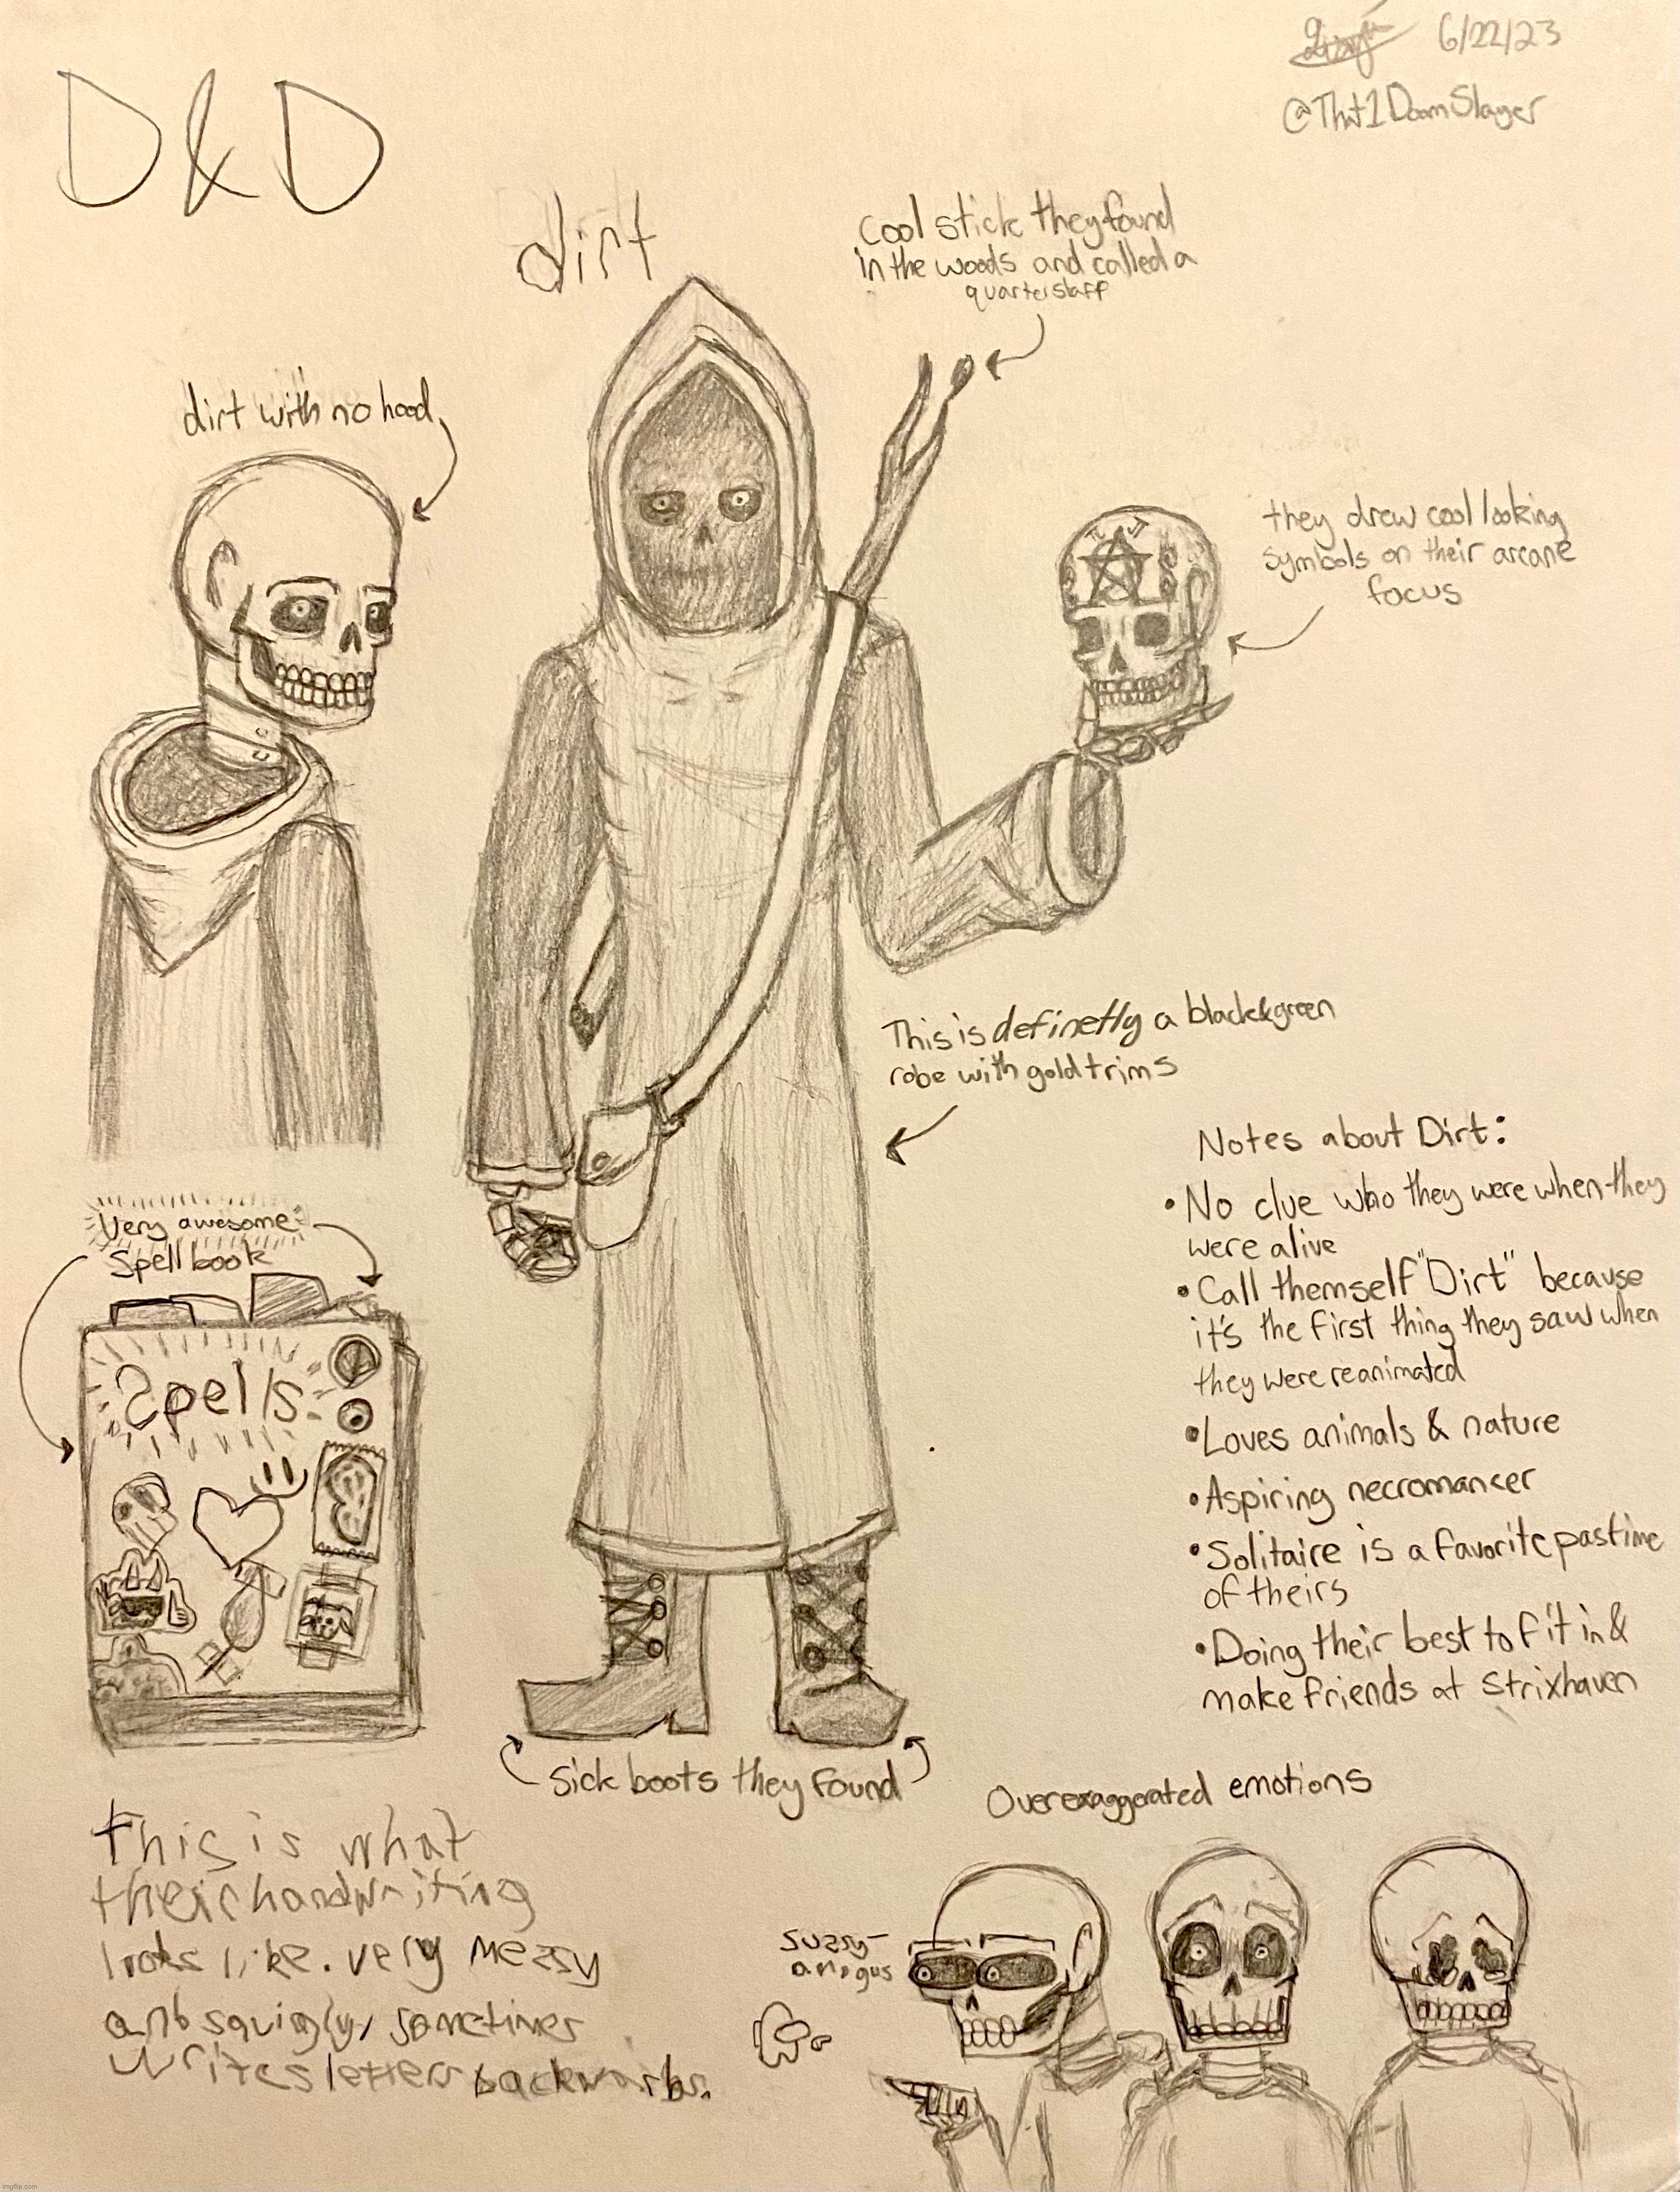 Behold, my latest DnD character, Dirt | image tagged in drawing,ocs,dnd,why are you reading the tags,sussy,amogus | made w/ Imgflip meme maker